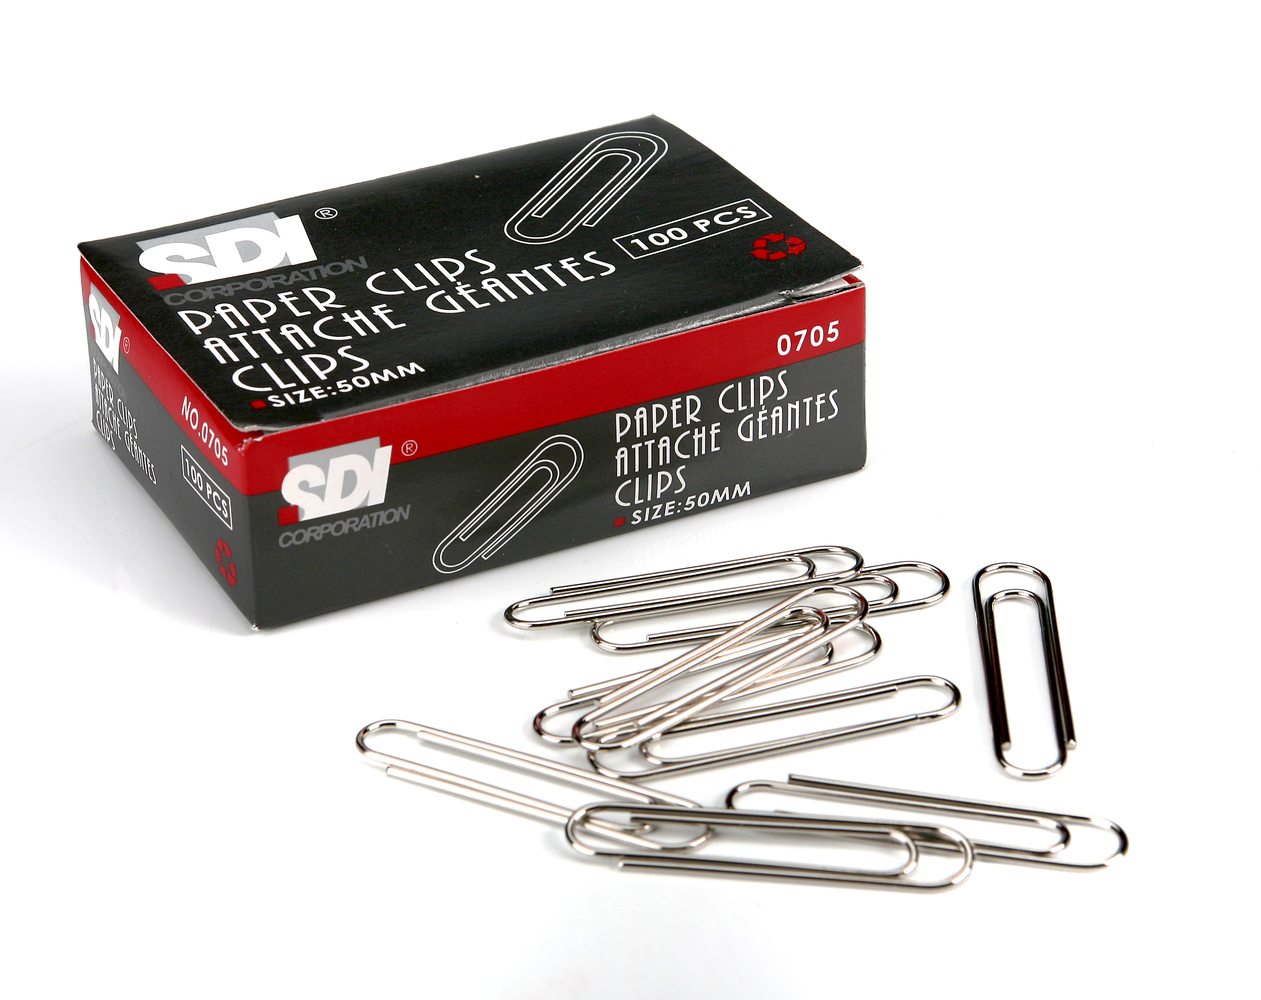 HAND PAPER CLIPS 50MM